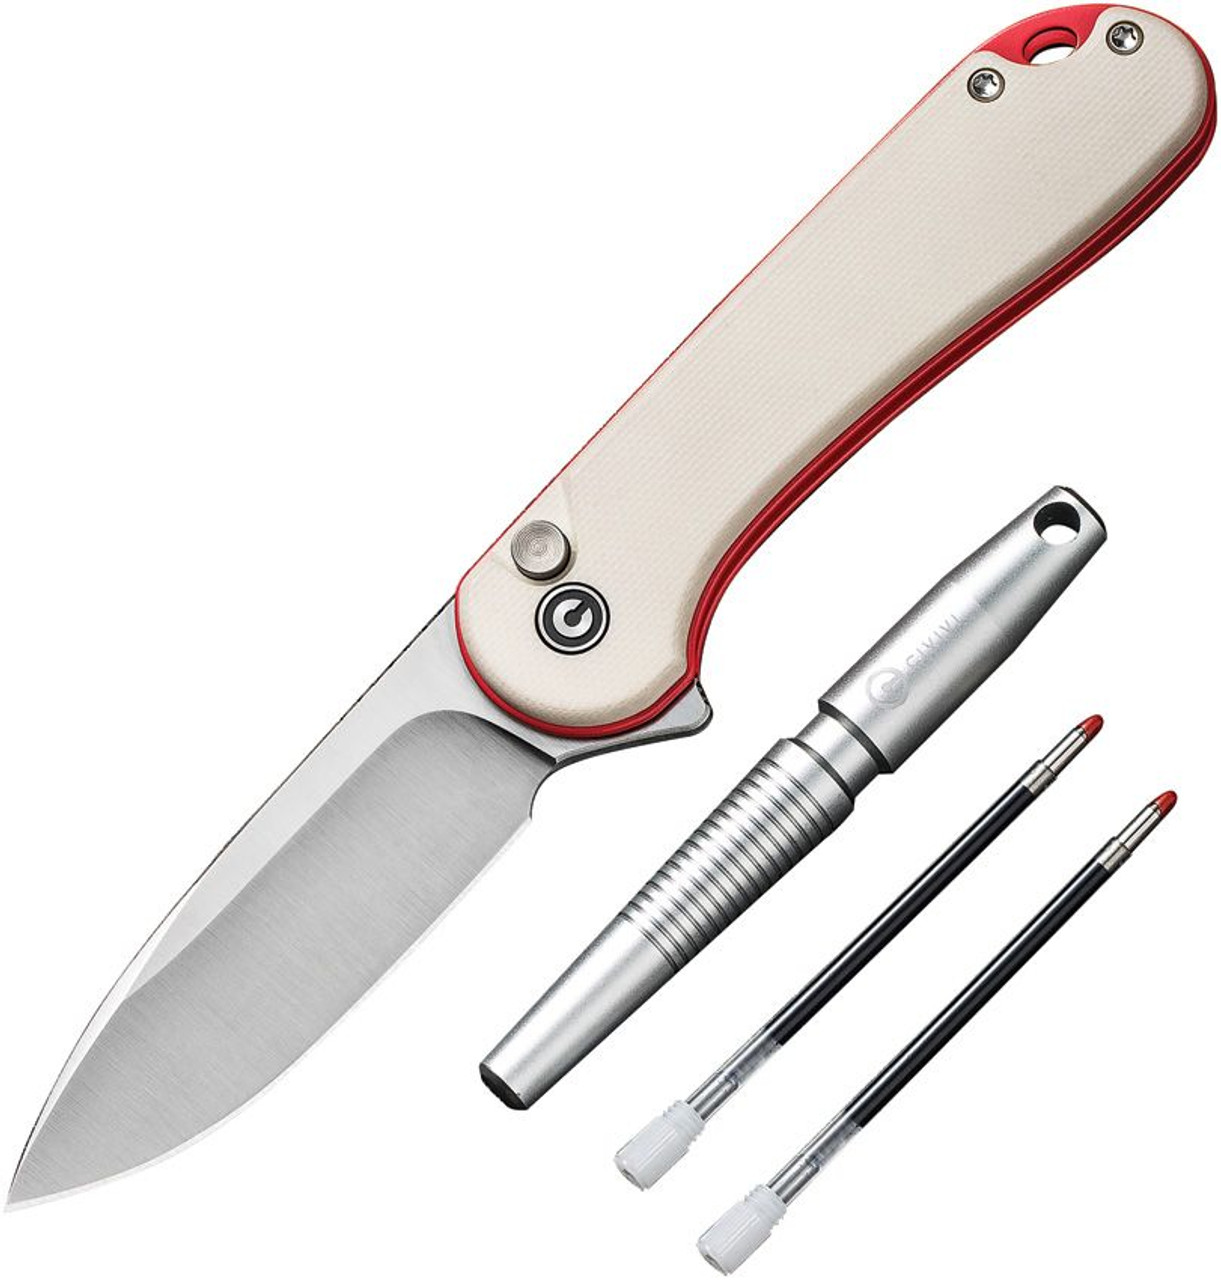 CIVIVI StellarQuill Pen & Elementum II Knife Combo (C23049) 2.96" Nitro-V Satin Drop Point Bladem White G-10 with Red Liners Handle - Silver Aluminum Pen